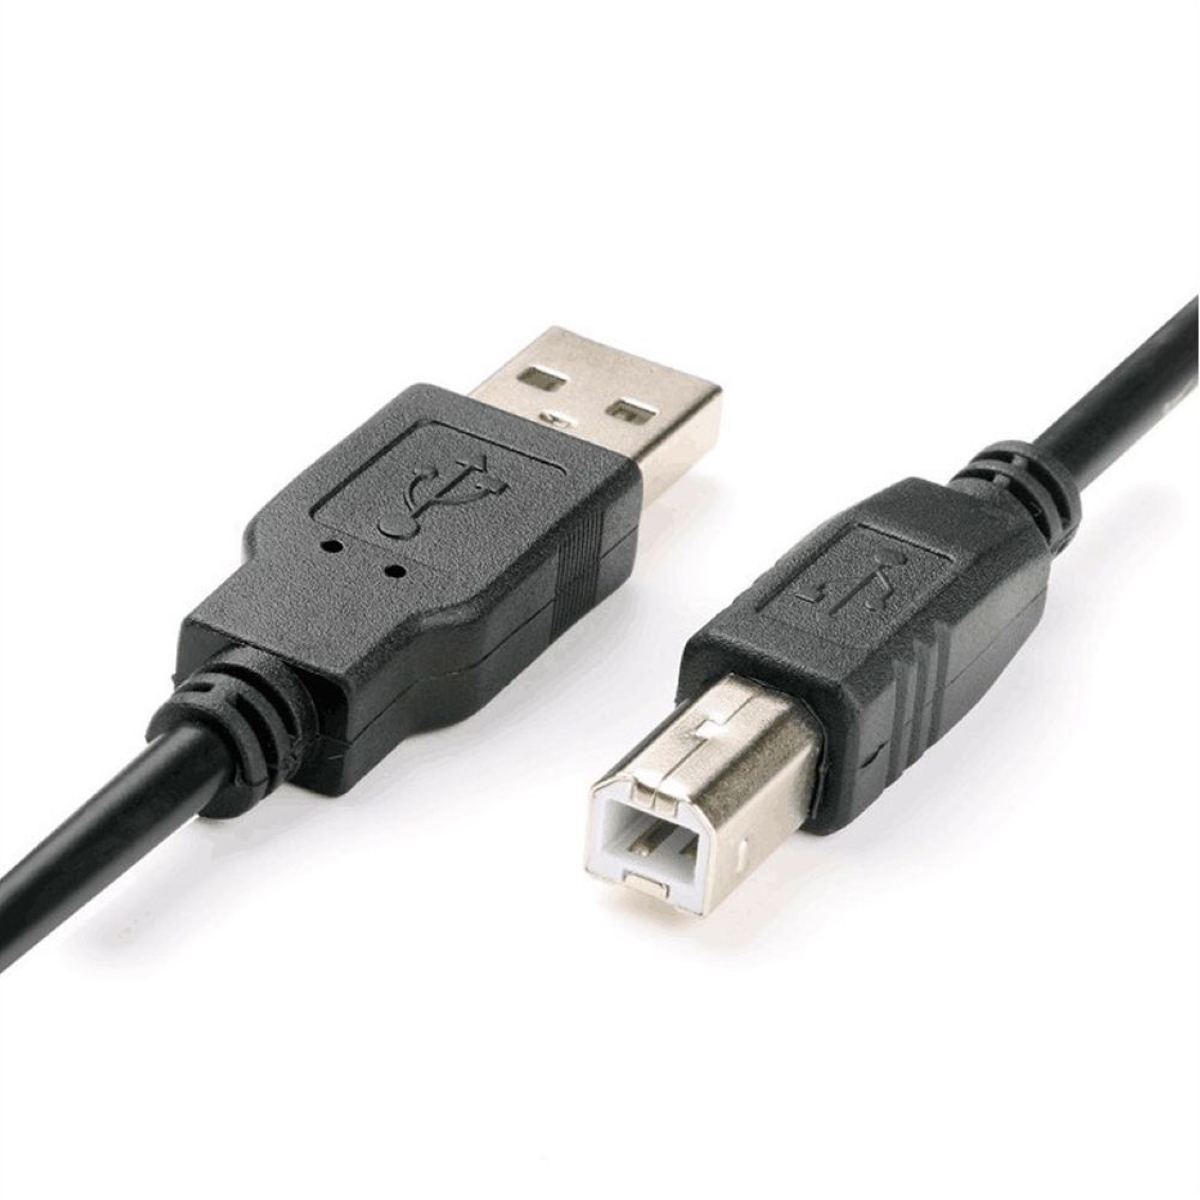 What Does A Printer Cable Look Like